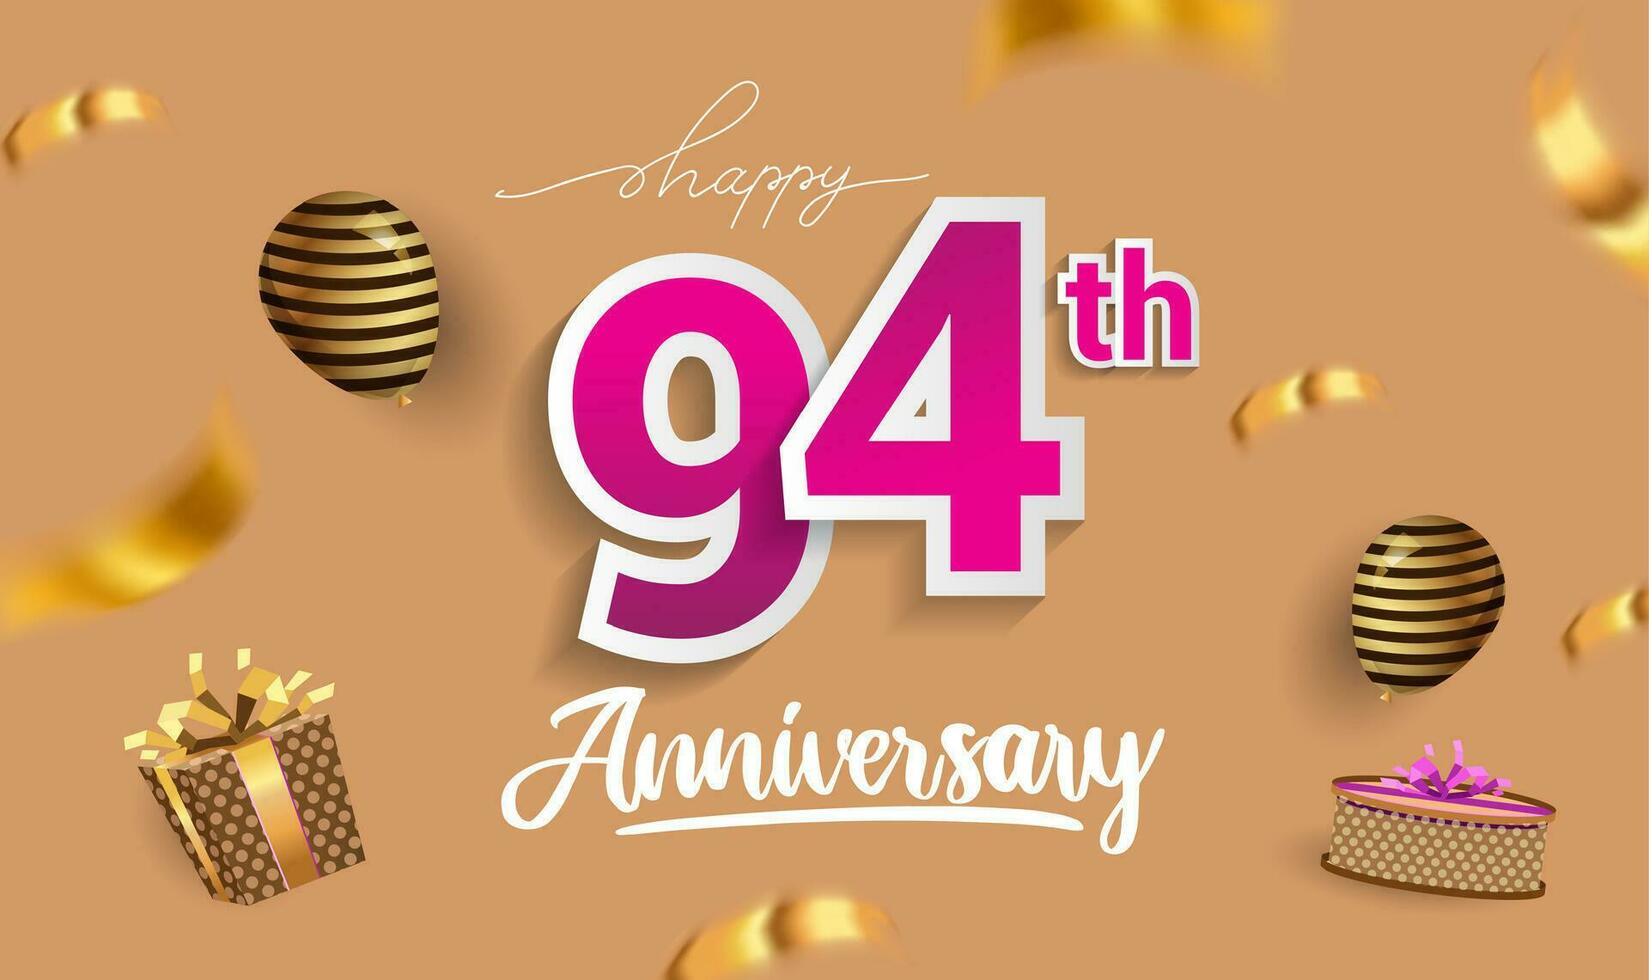 94th Years Anniversary Celebration Design, with gift box and balloons, ribbon, Colorful Vector template elements for your birthday celebrating party.